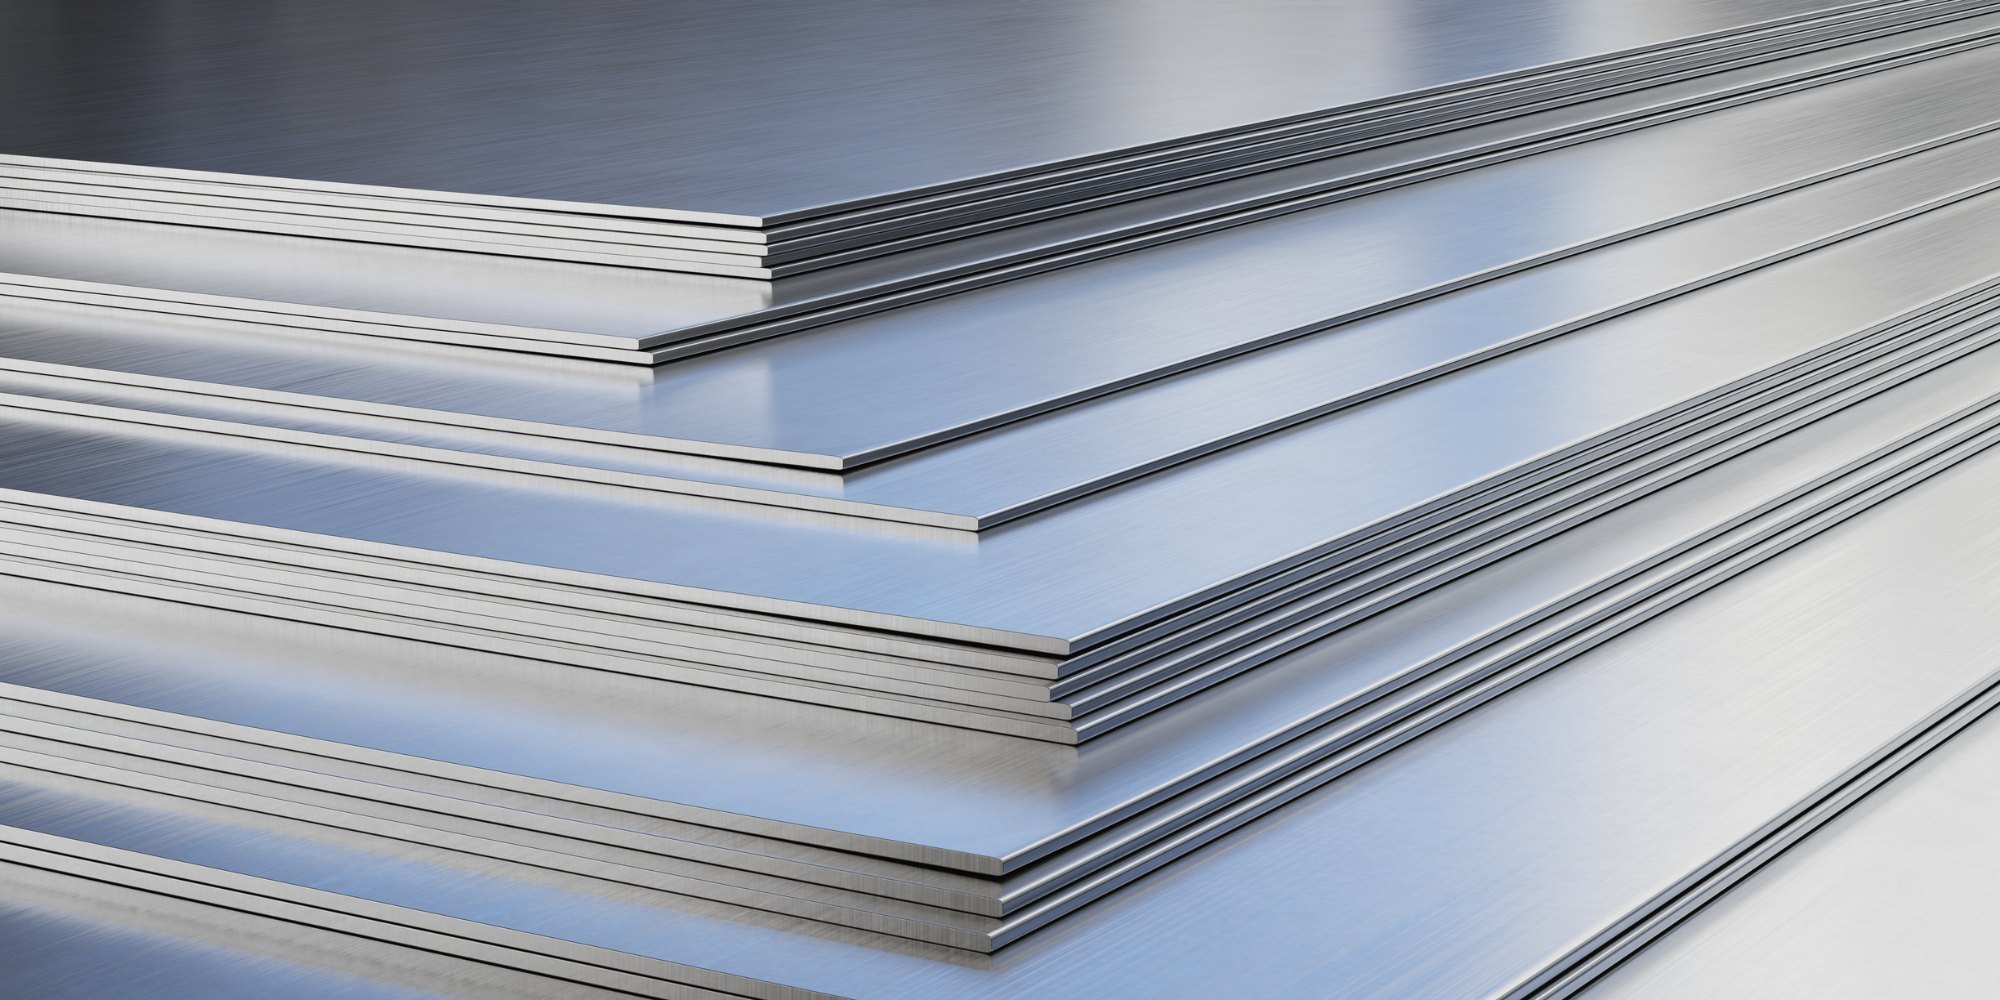 stainless-steel-304l-mill-finish-sheets.jpg